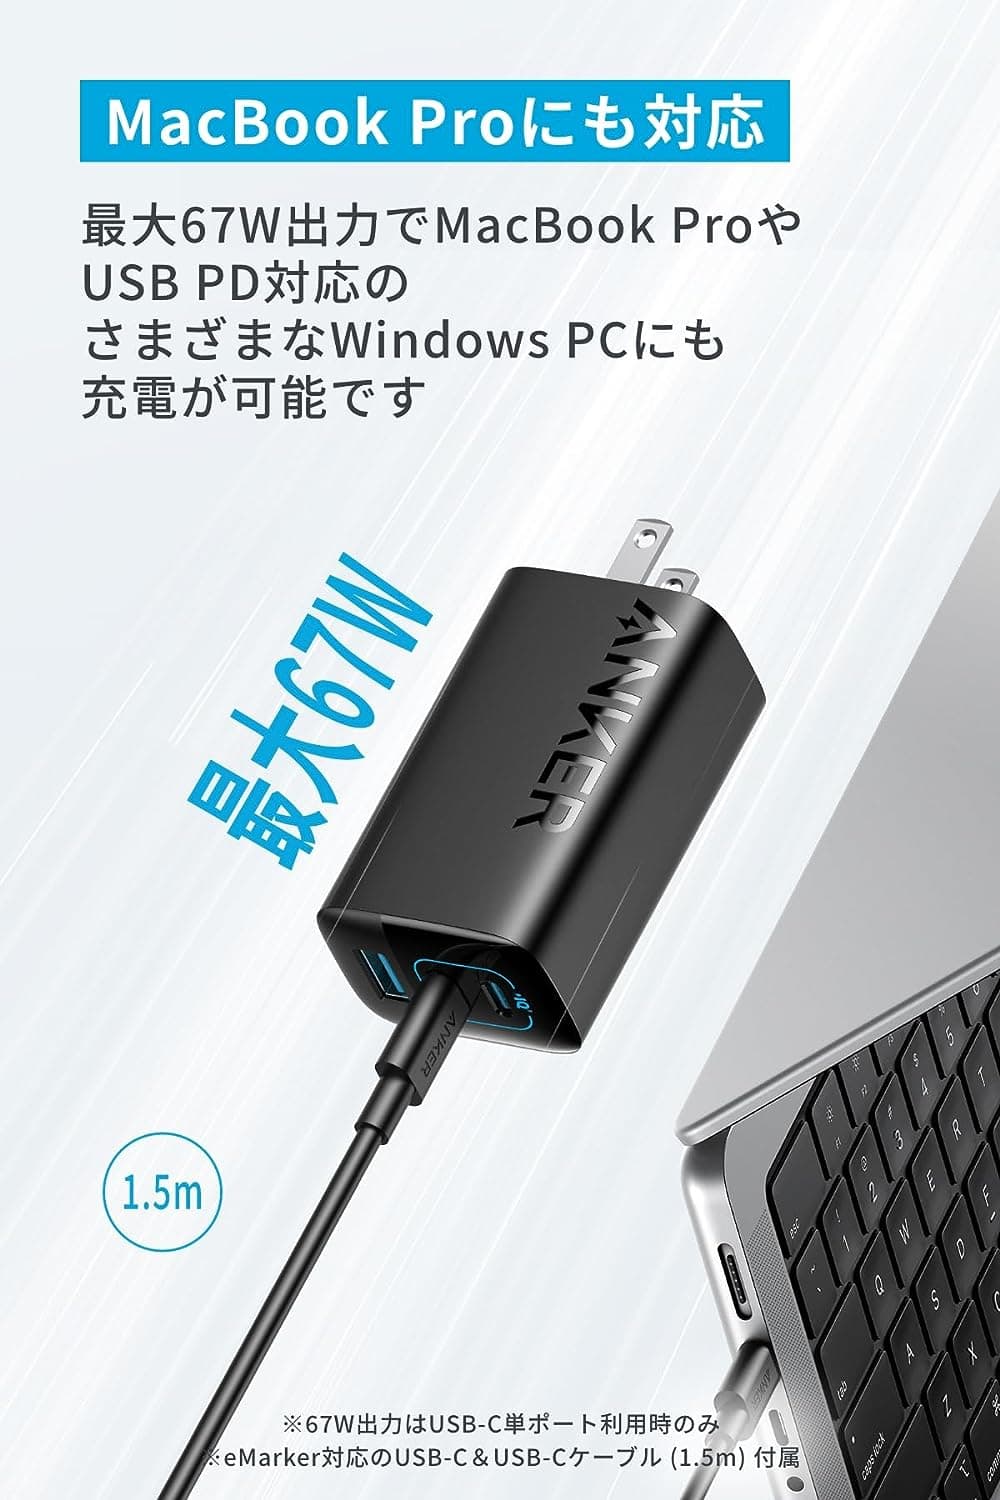 Anker Charger (67W, 3-Port) with USB-C & USB-C ケーブル１